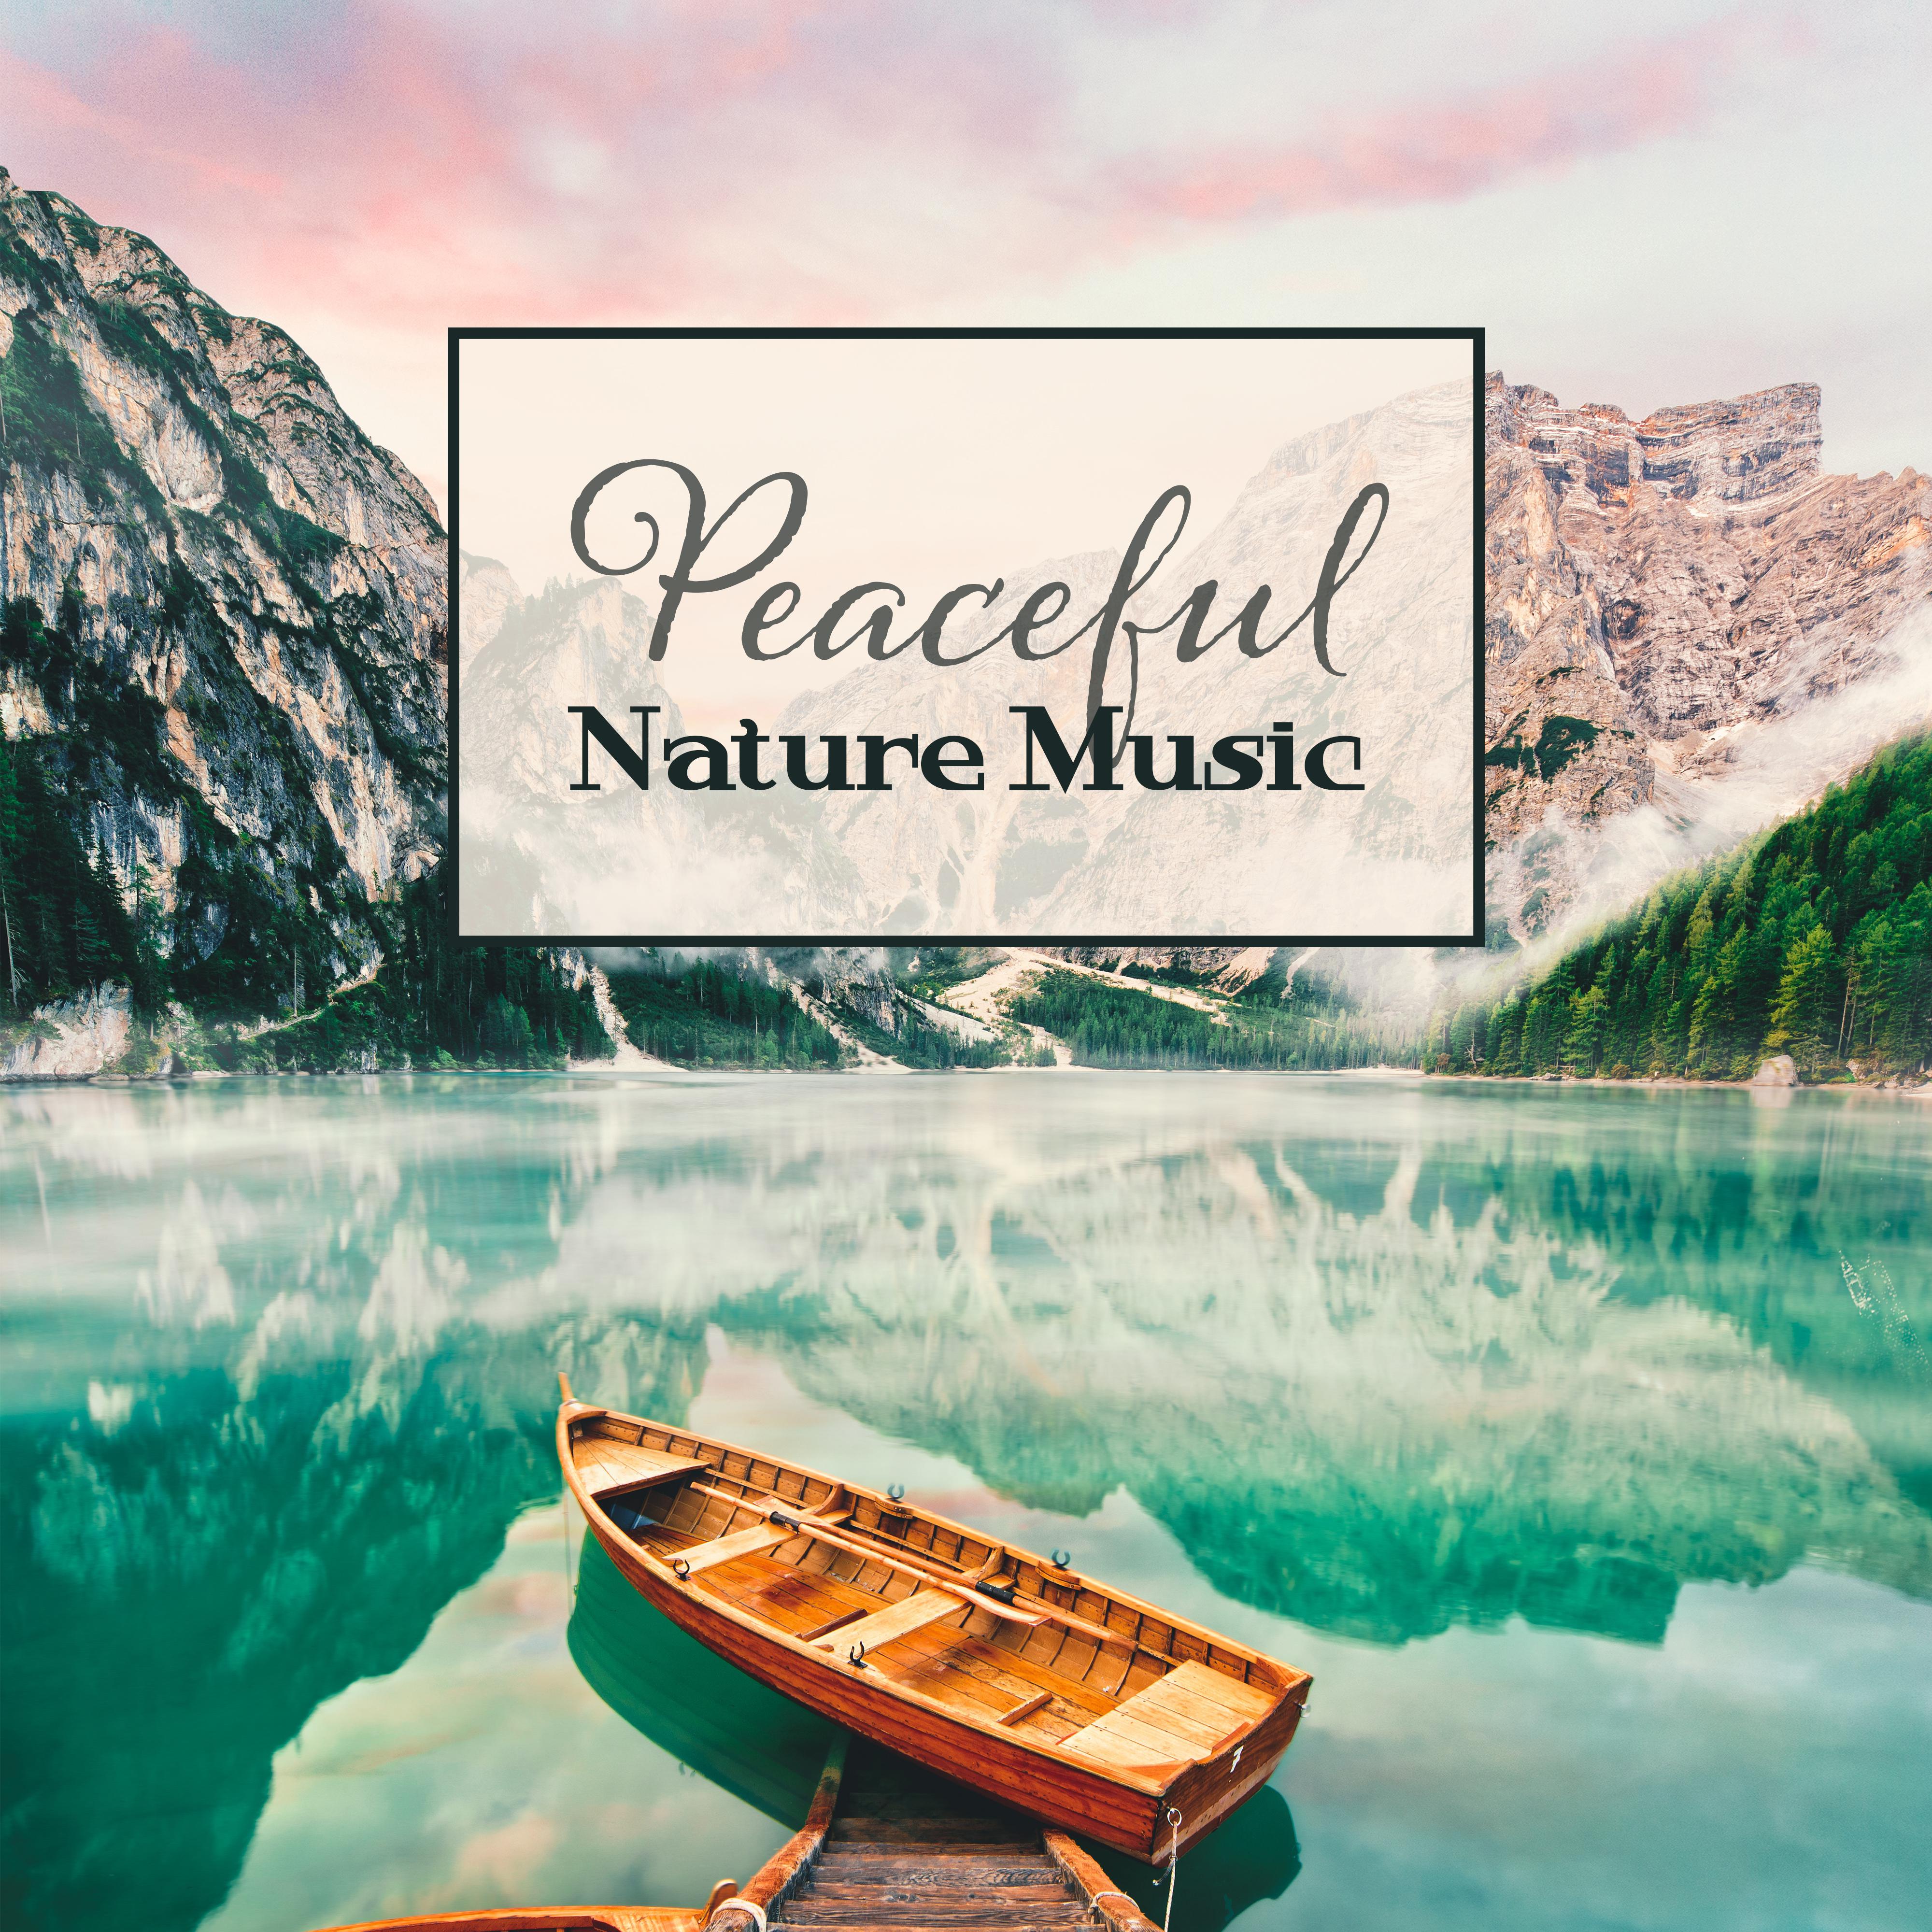 Peaceful Nature Music – Easy Listening, Nature Relaxation, Time to Rest, Healing Therapy